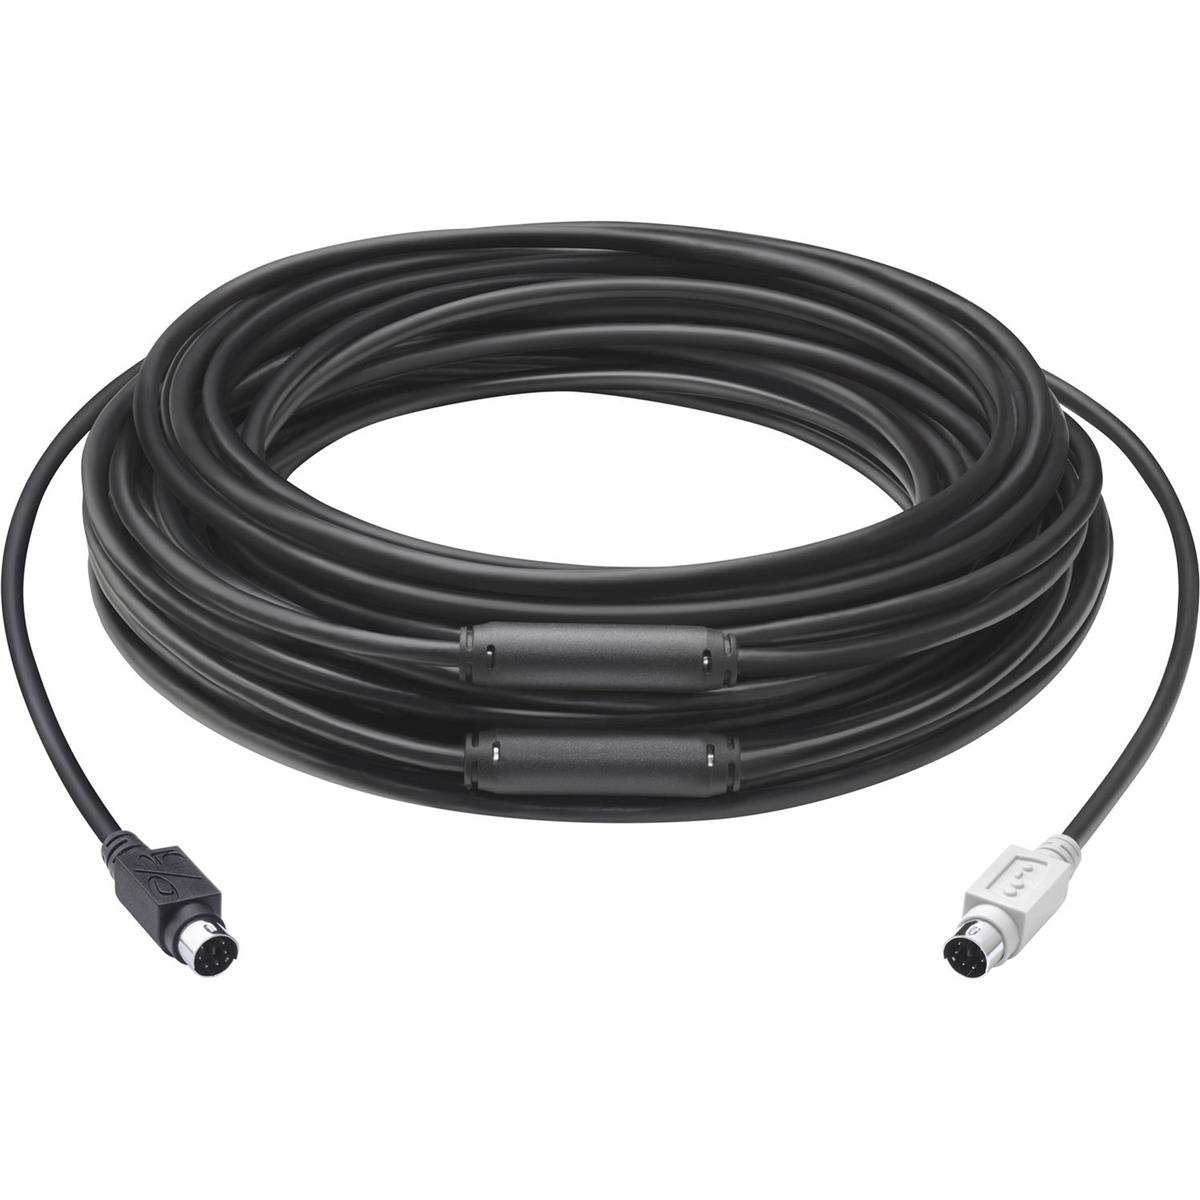 Image of Logitech 32.8' GROUP Extender Cable